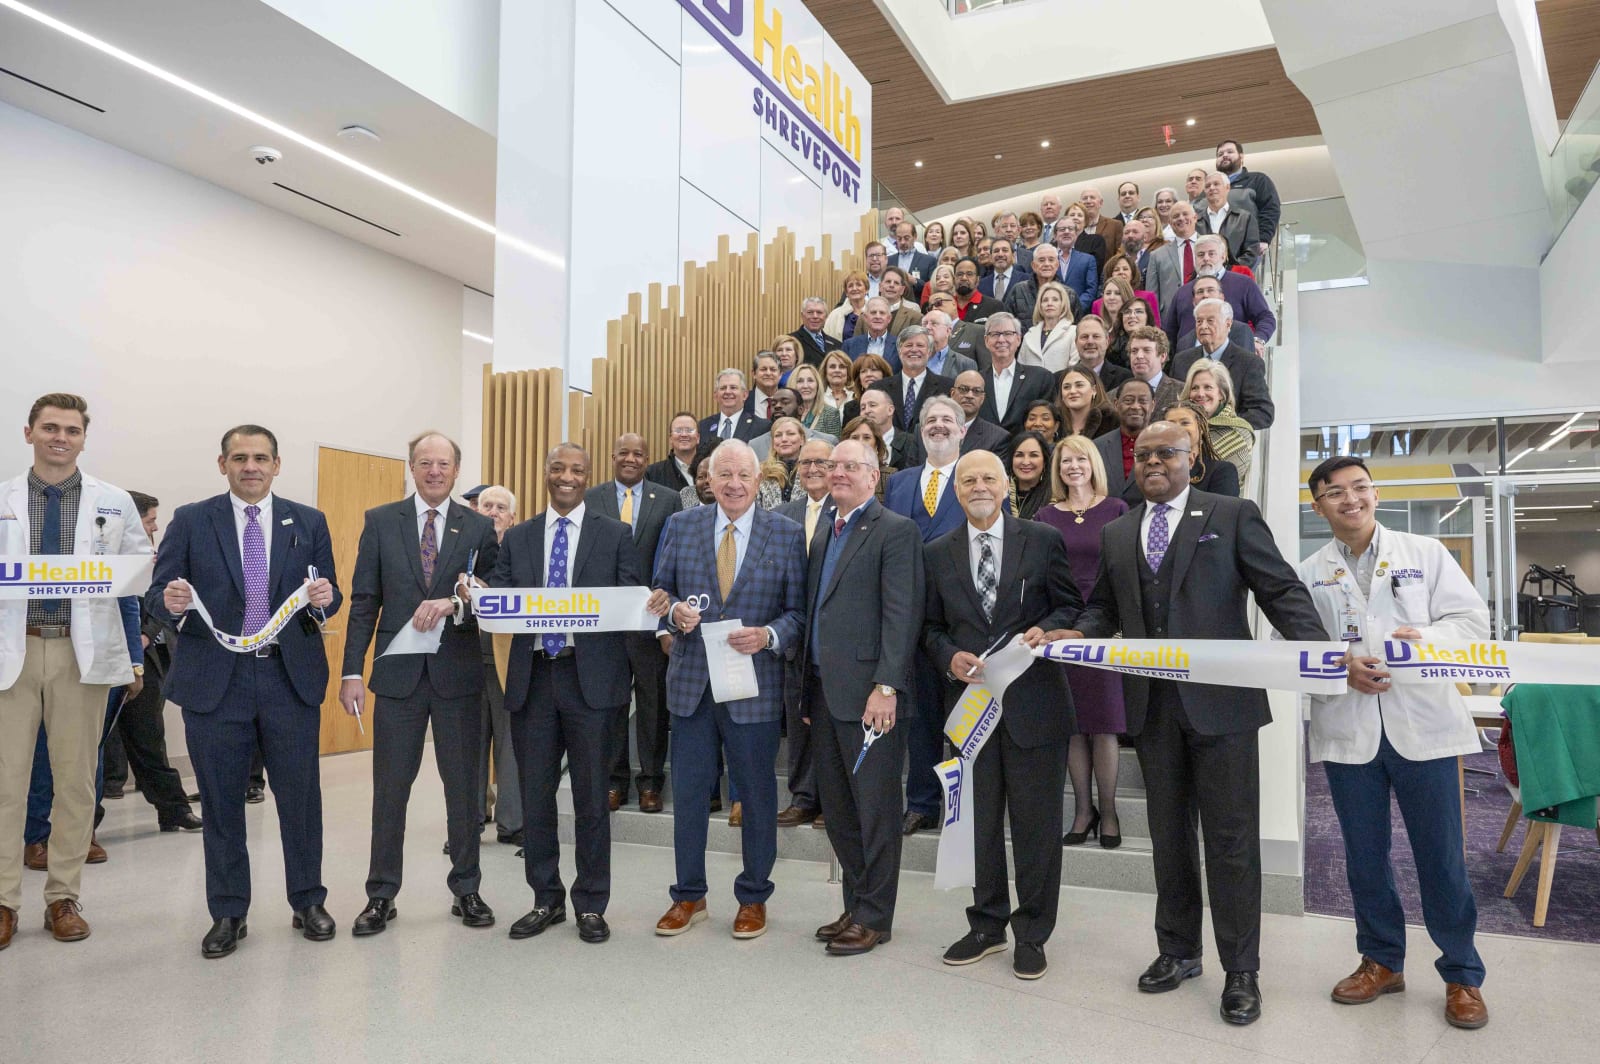 LSU President Tate, Gov. John Bel Edwards and others take part in a ribbon cutting inside the new medical education building